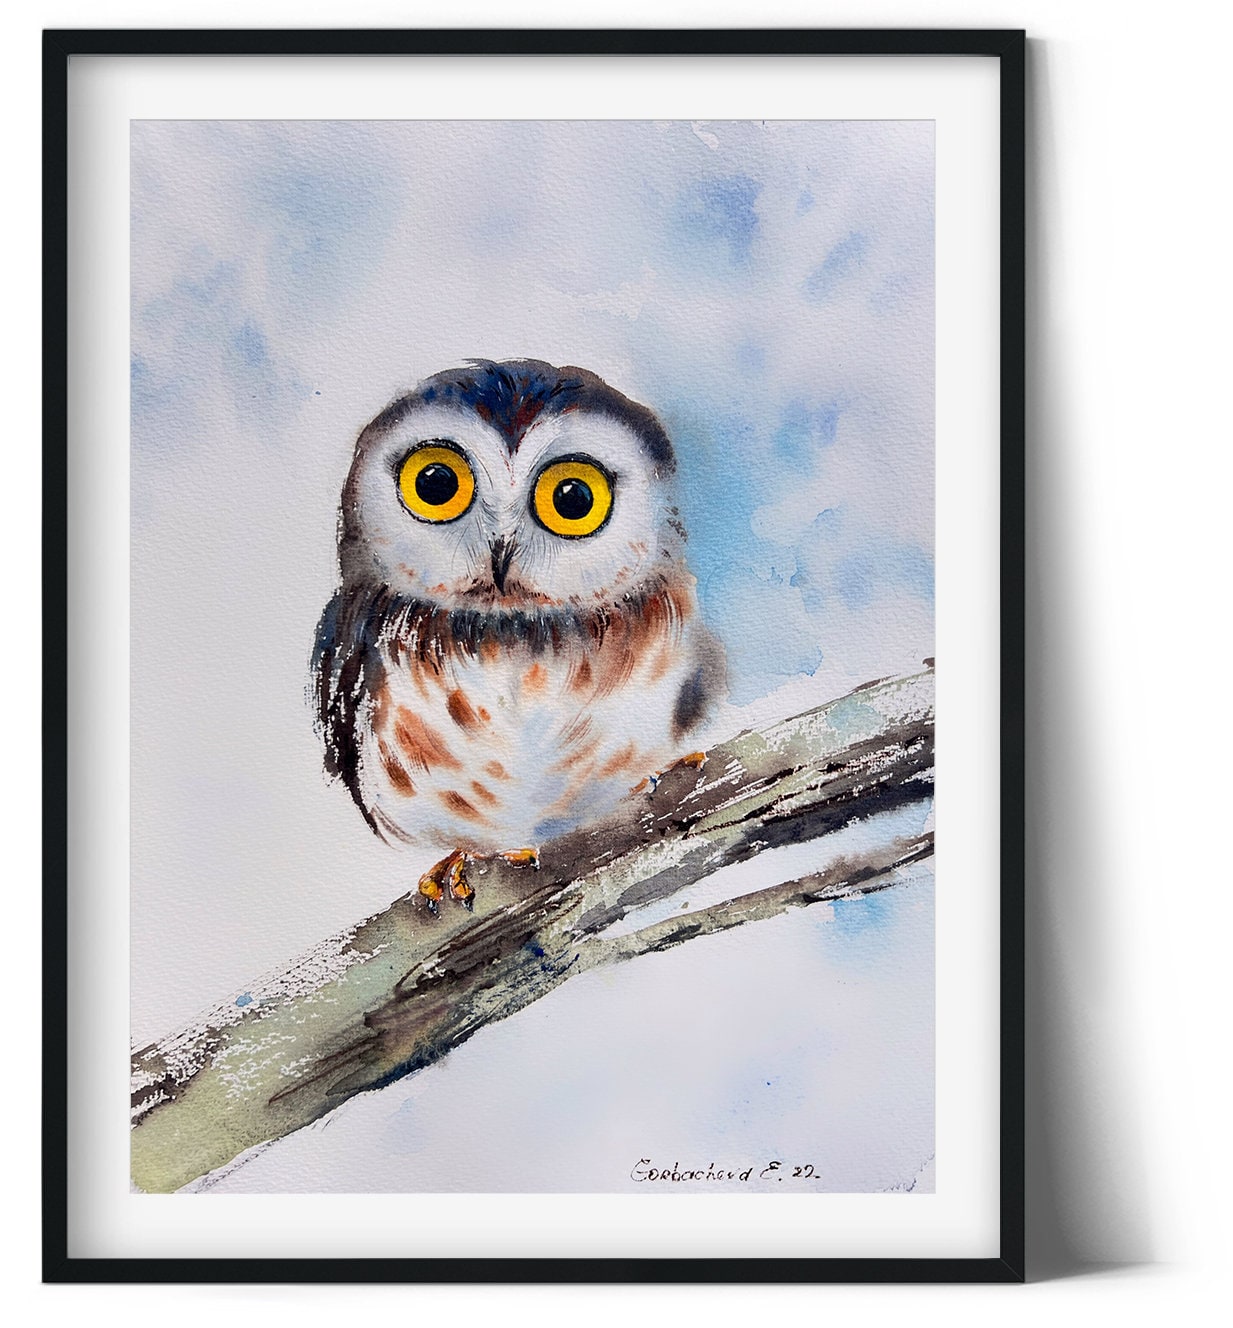 Original Illustration Watercolor Painting - Baby Owl on a branch